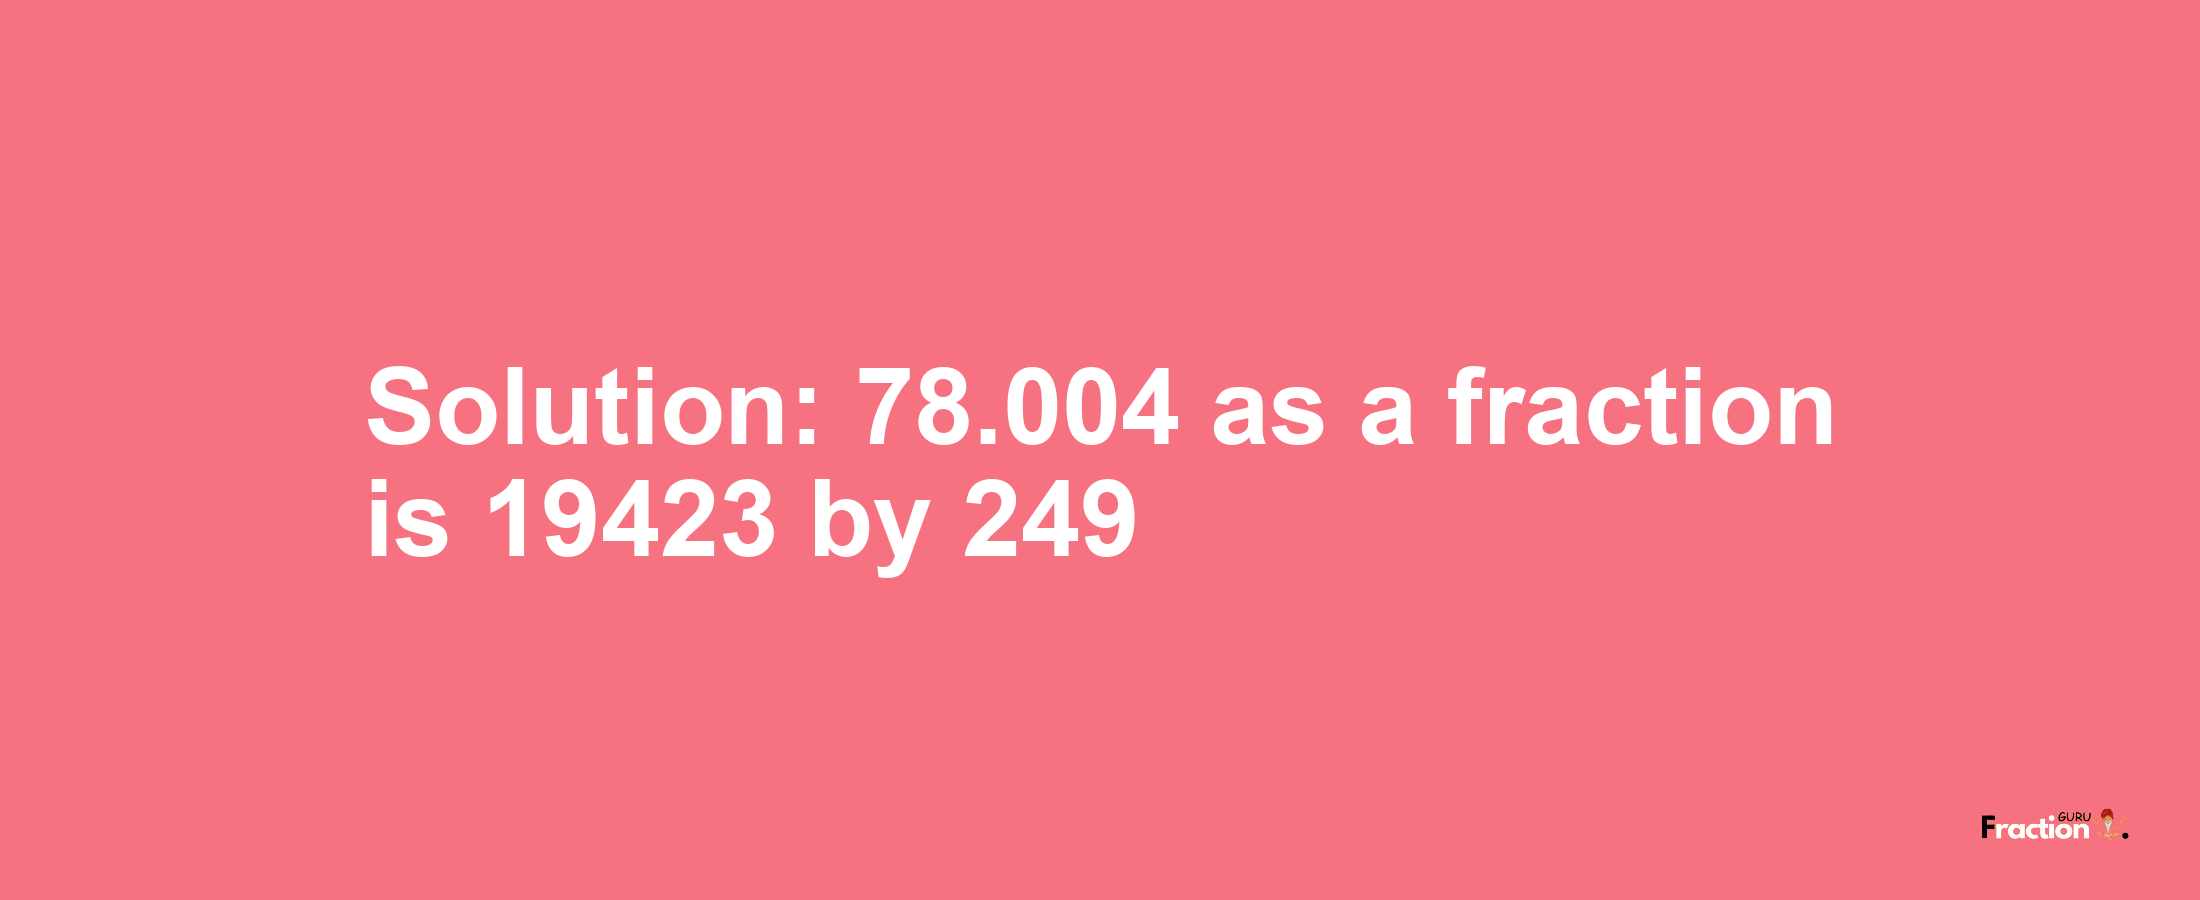 Solution:78.004 as a fraction is 19423/249